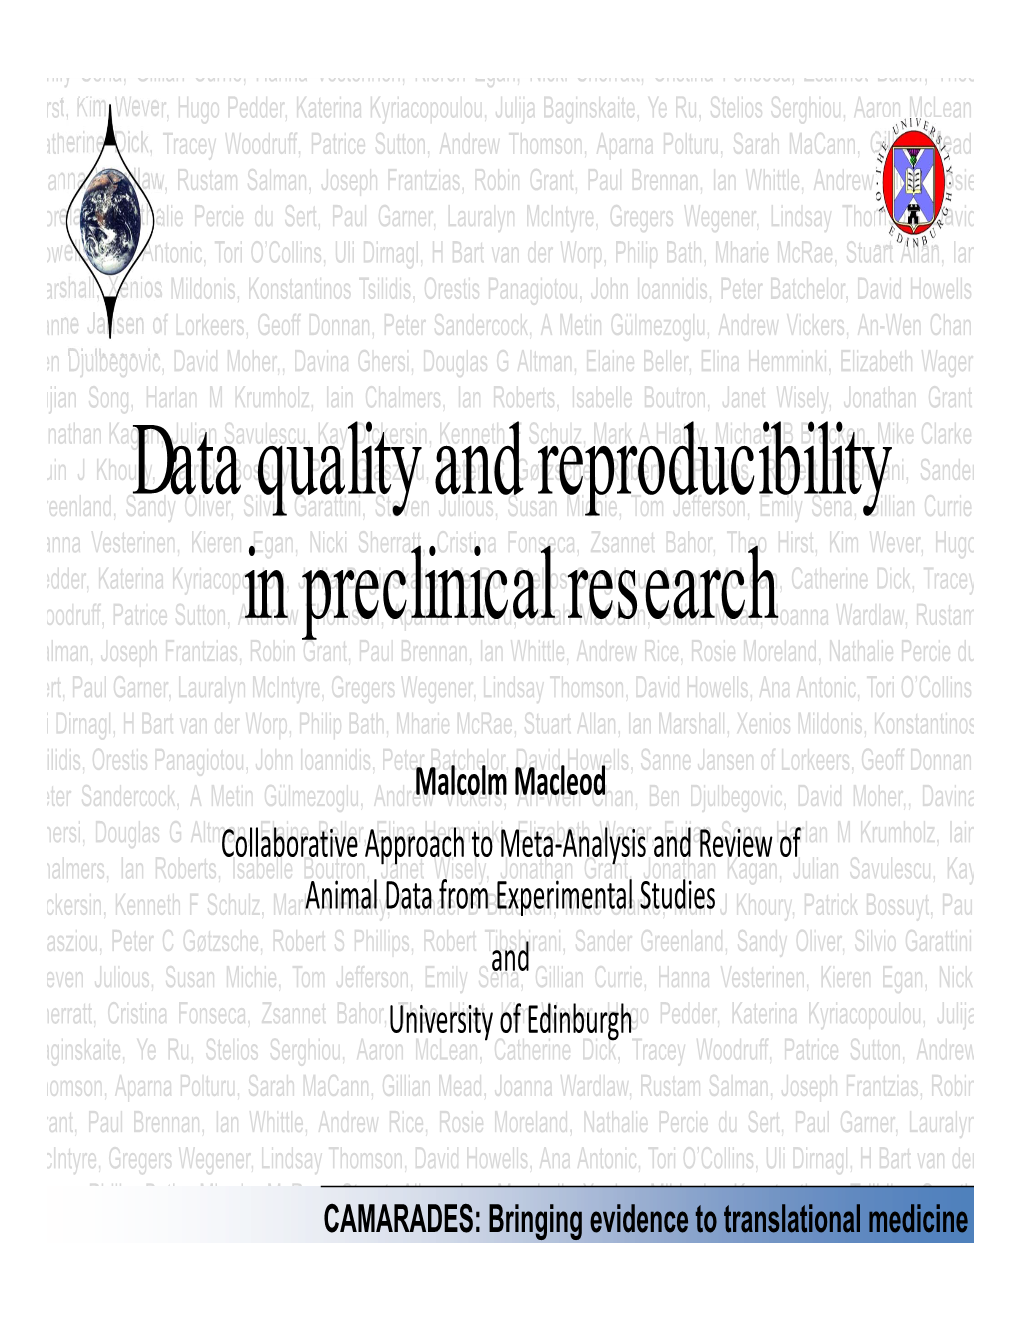 Data Quality and Reproducibility in Preclinical Research